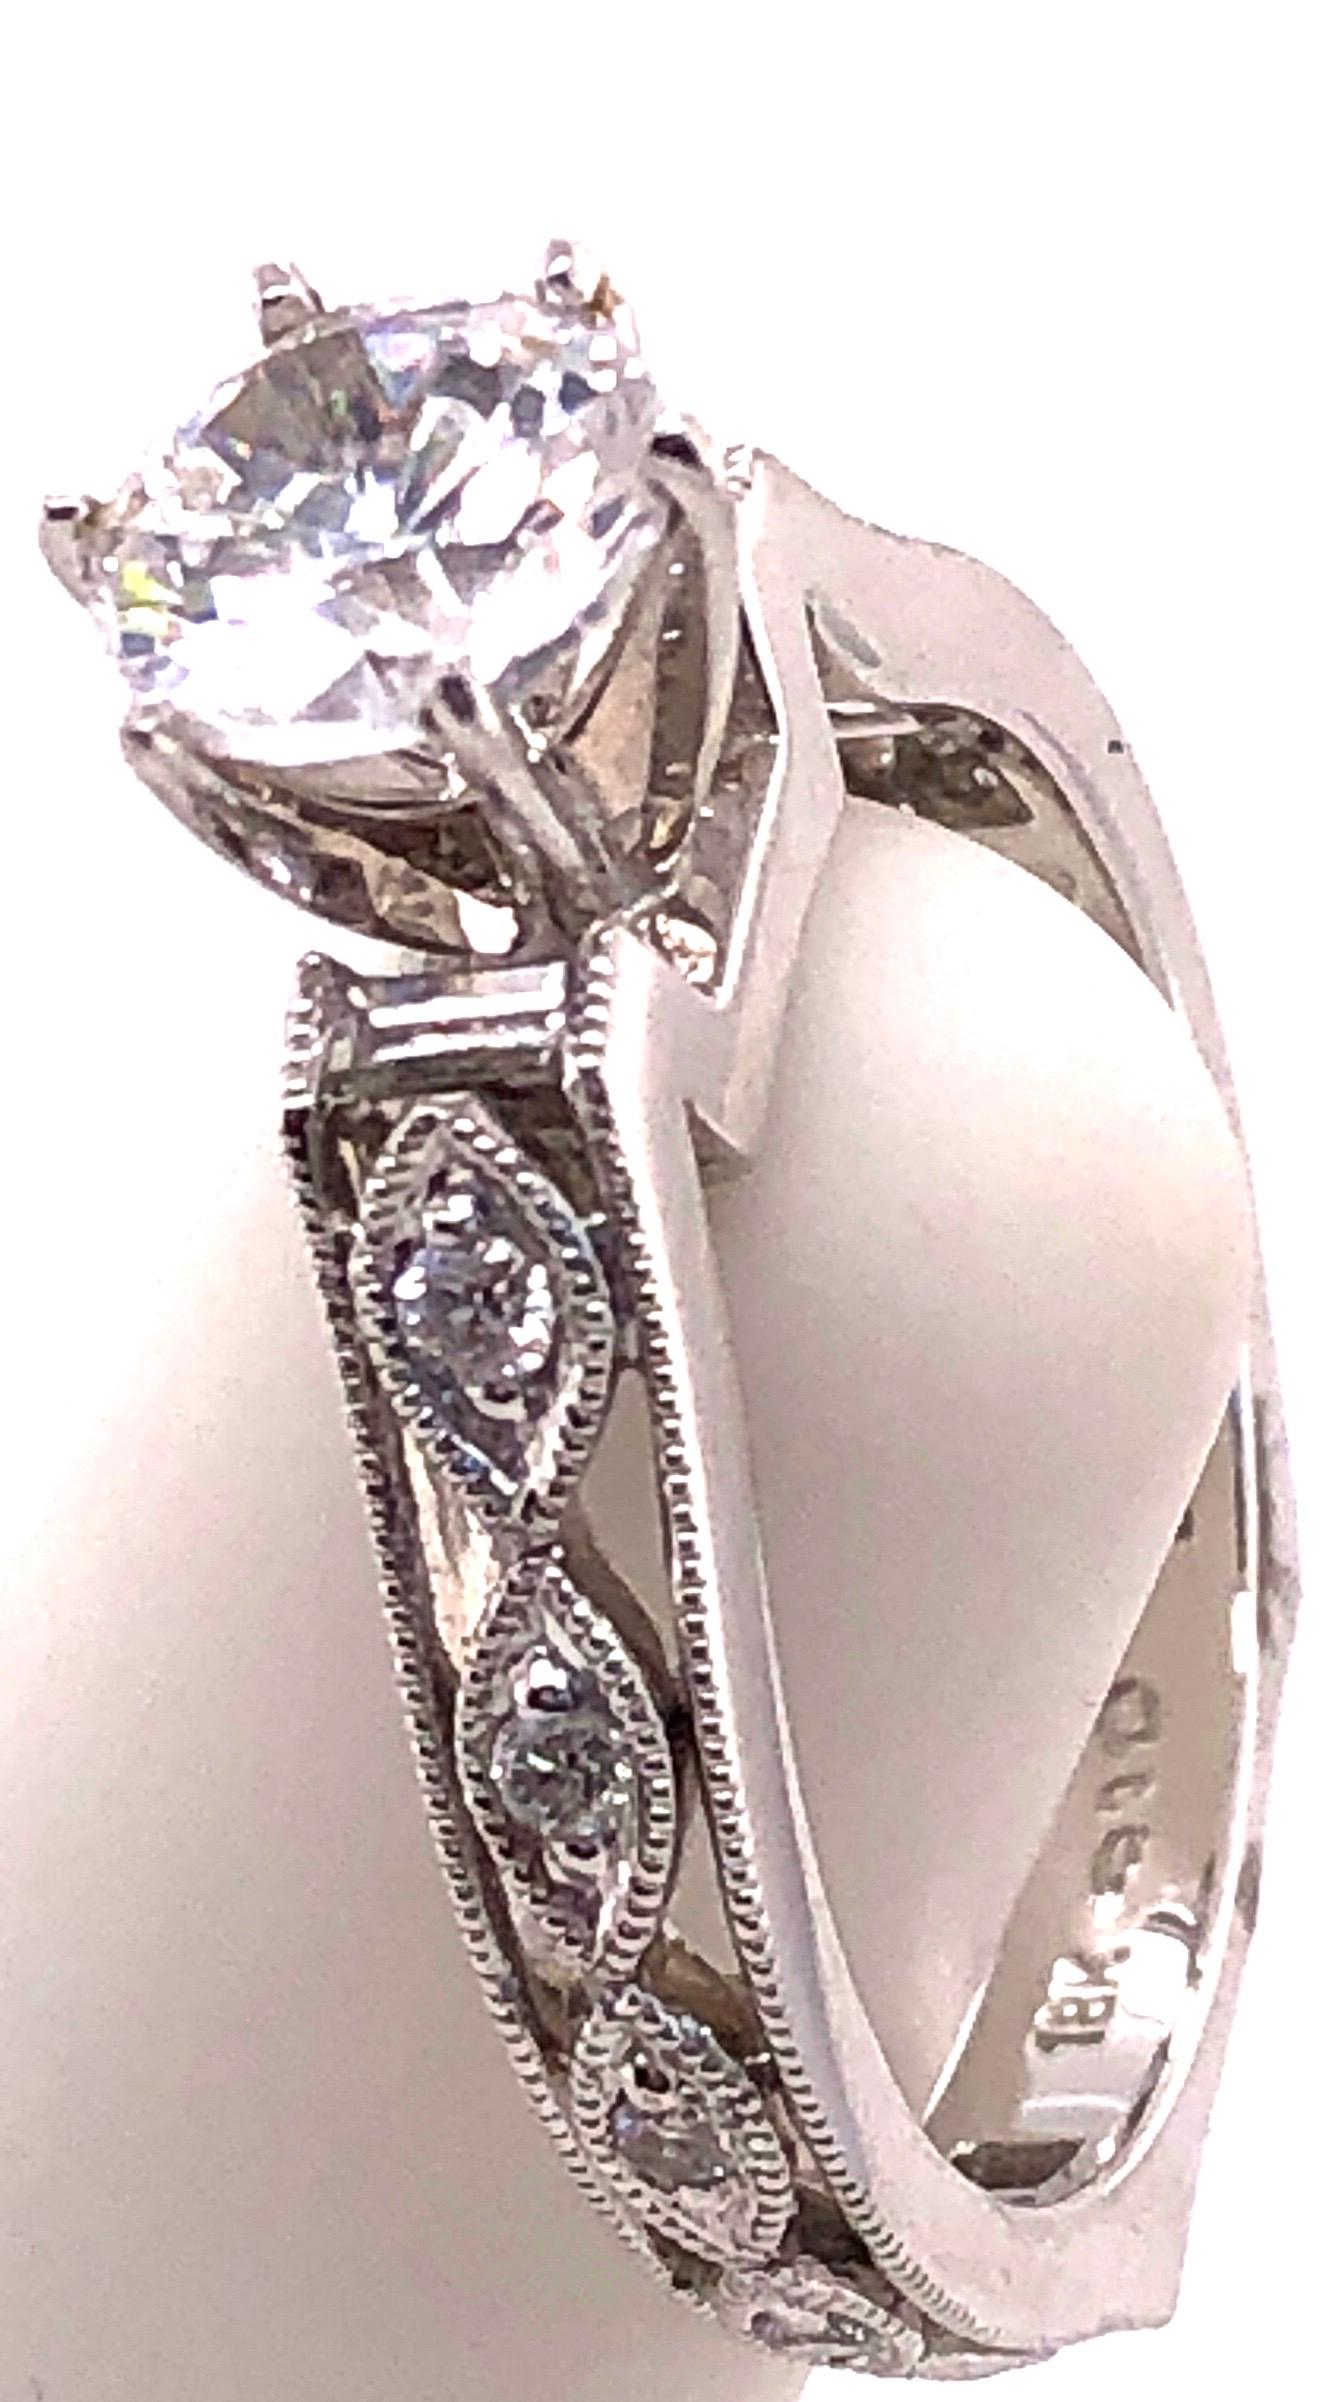 18 Karat White Gold Engagement Bridal Ring with Zircon Center 0.25 TDW In Good Condition For Sale In Stamford, CT